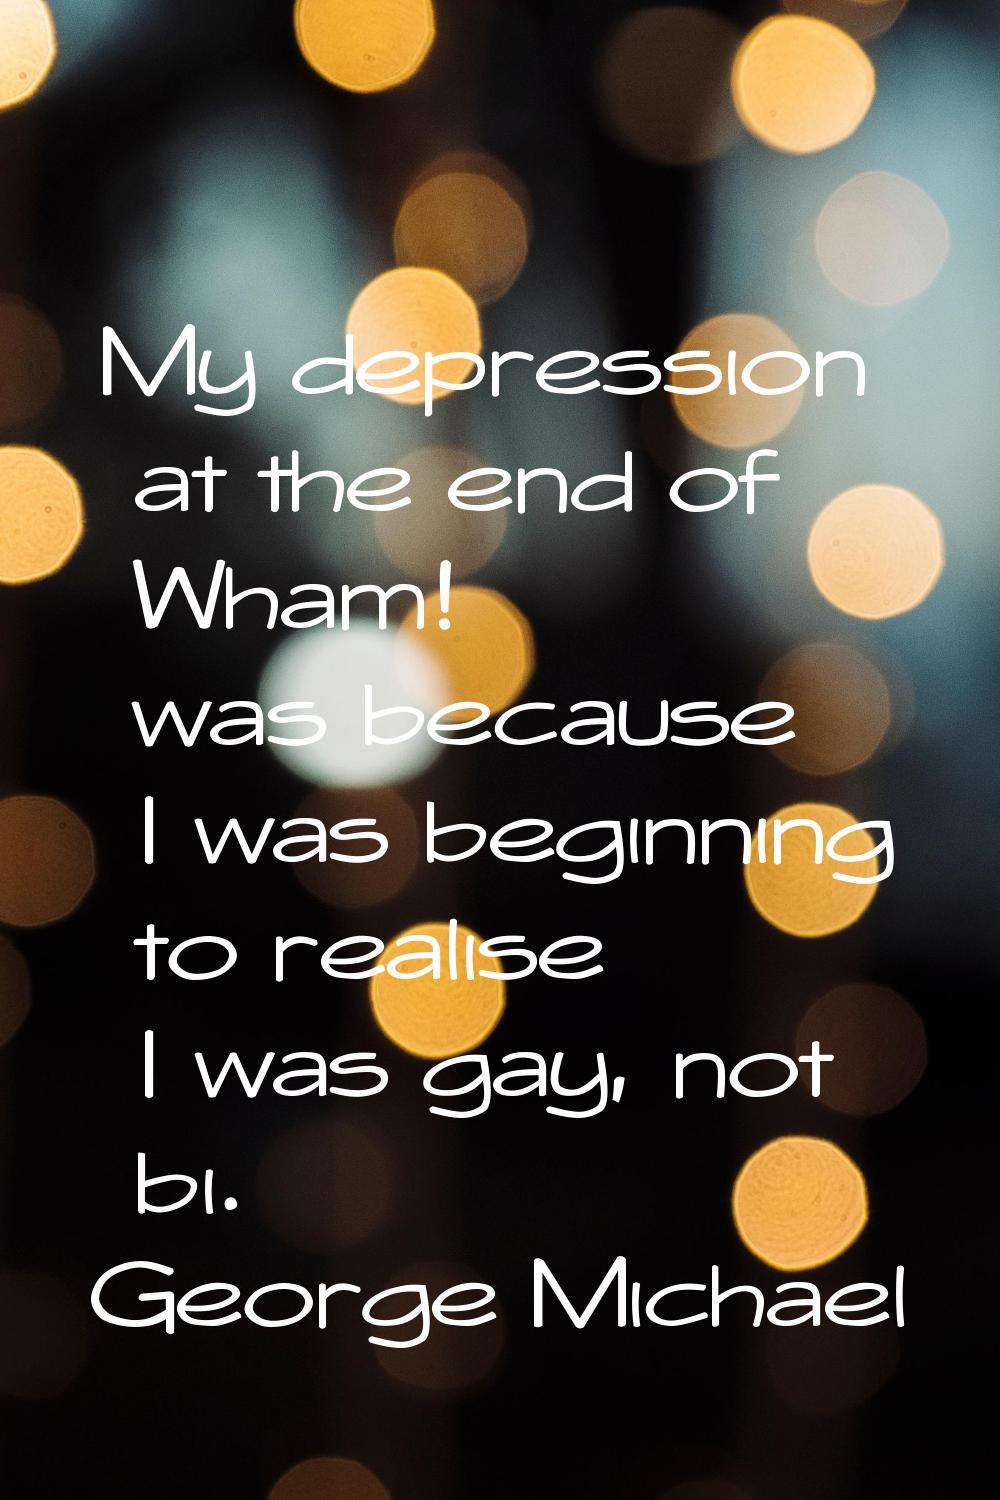 My depression at the end of Wham! was because I was beginning to realise I was gay, not bi.